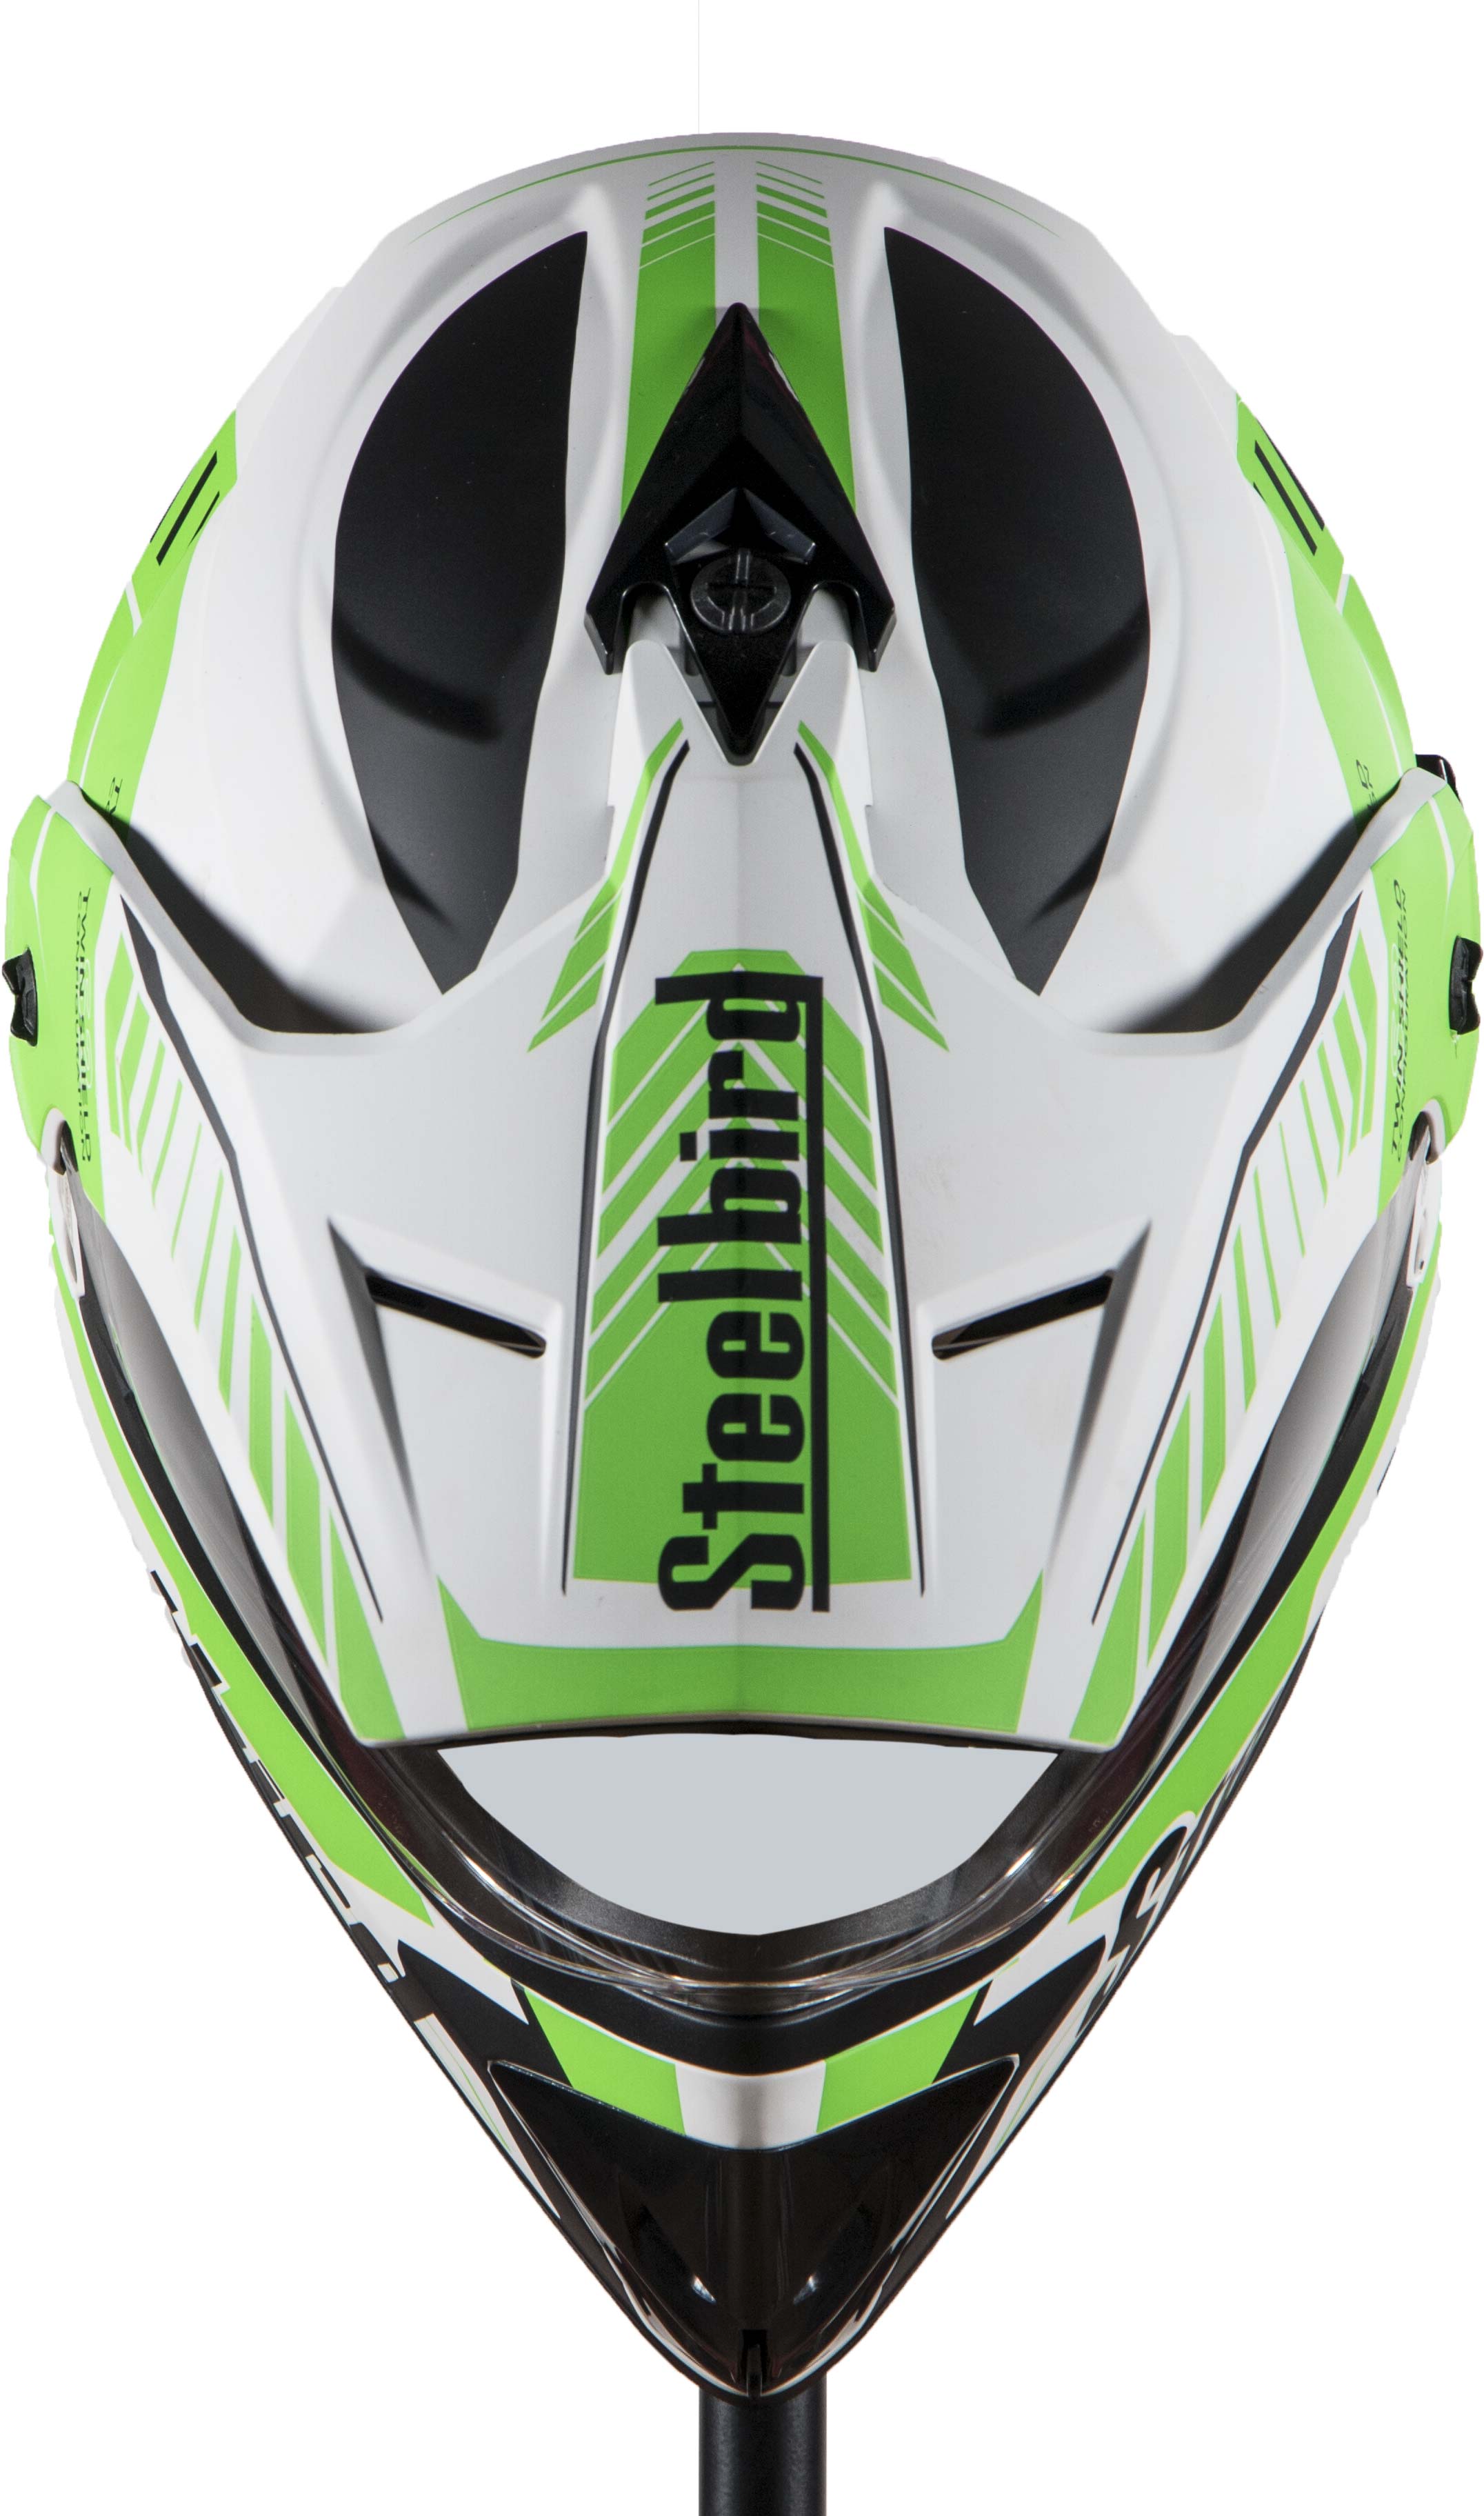 SB-42 Airborne Glossy White With Green +P-Cap